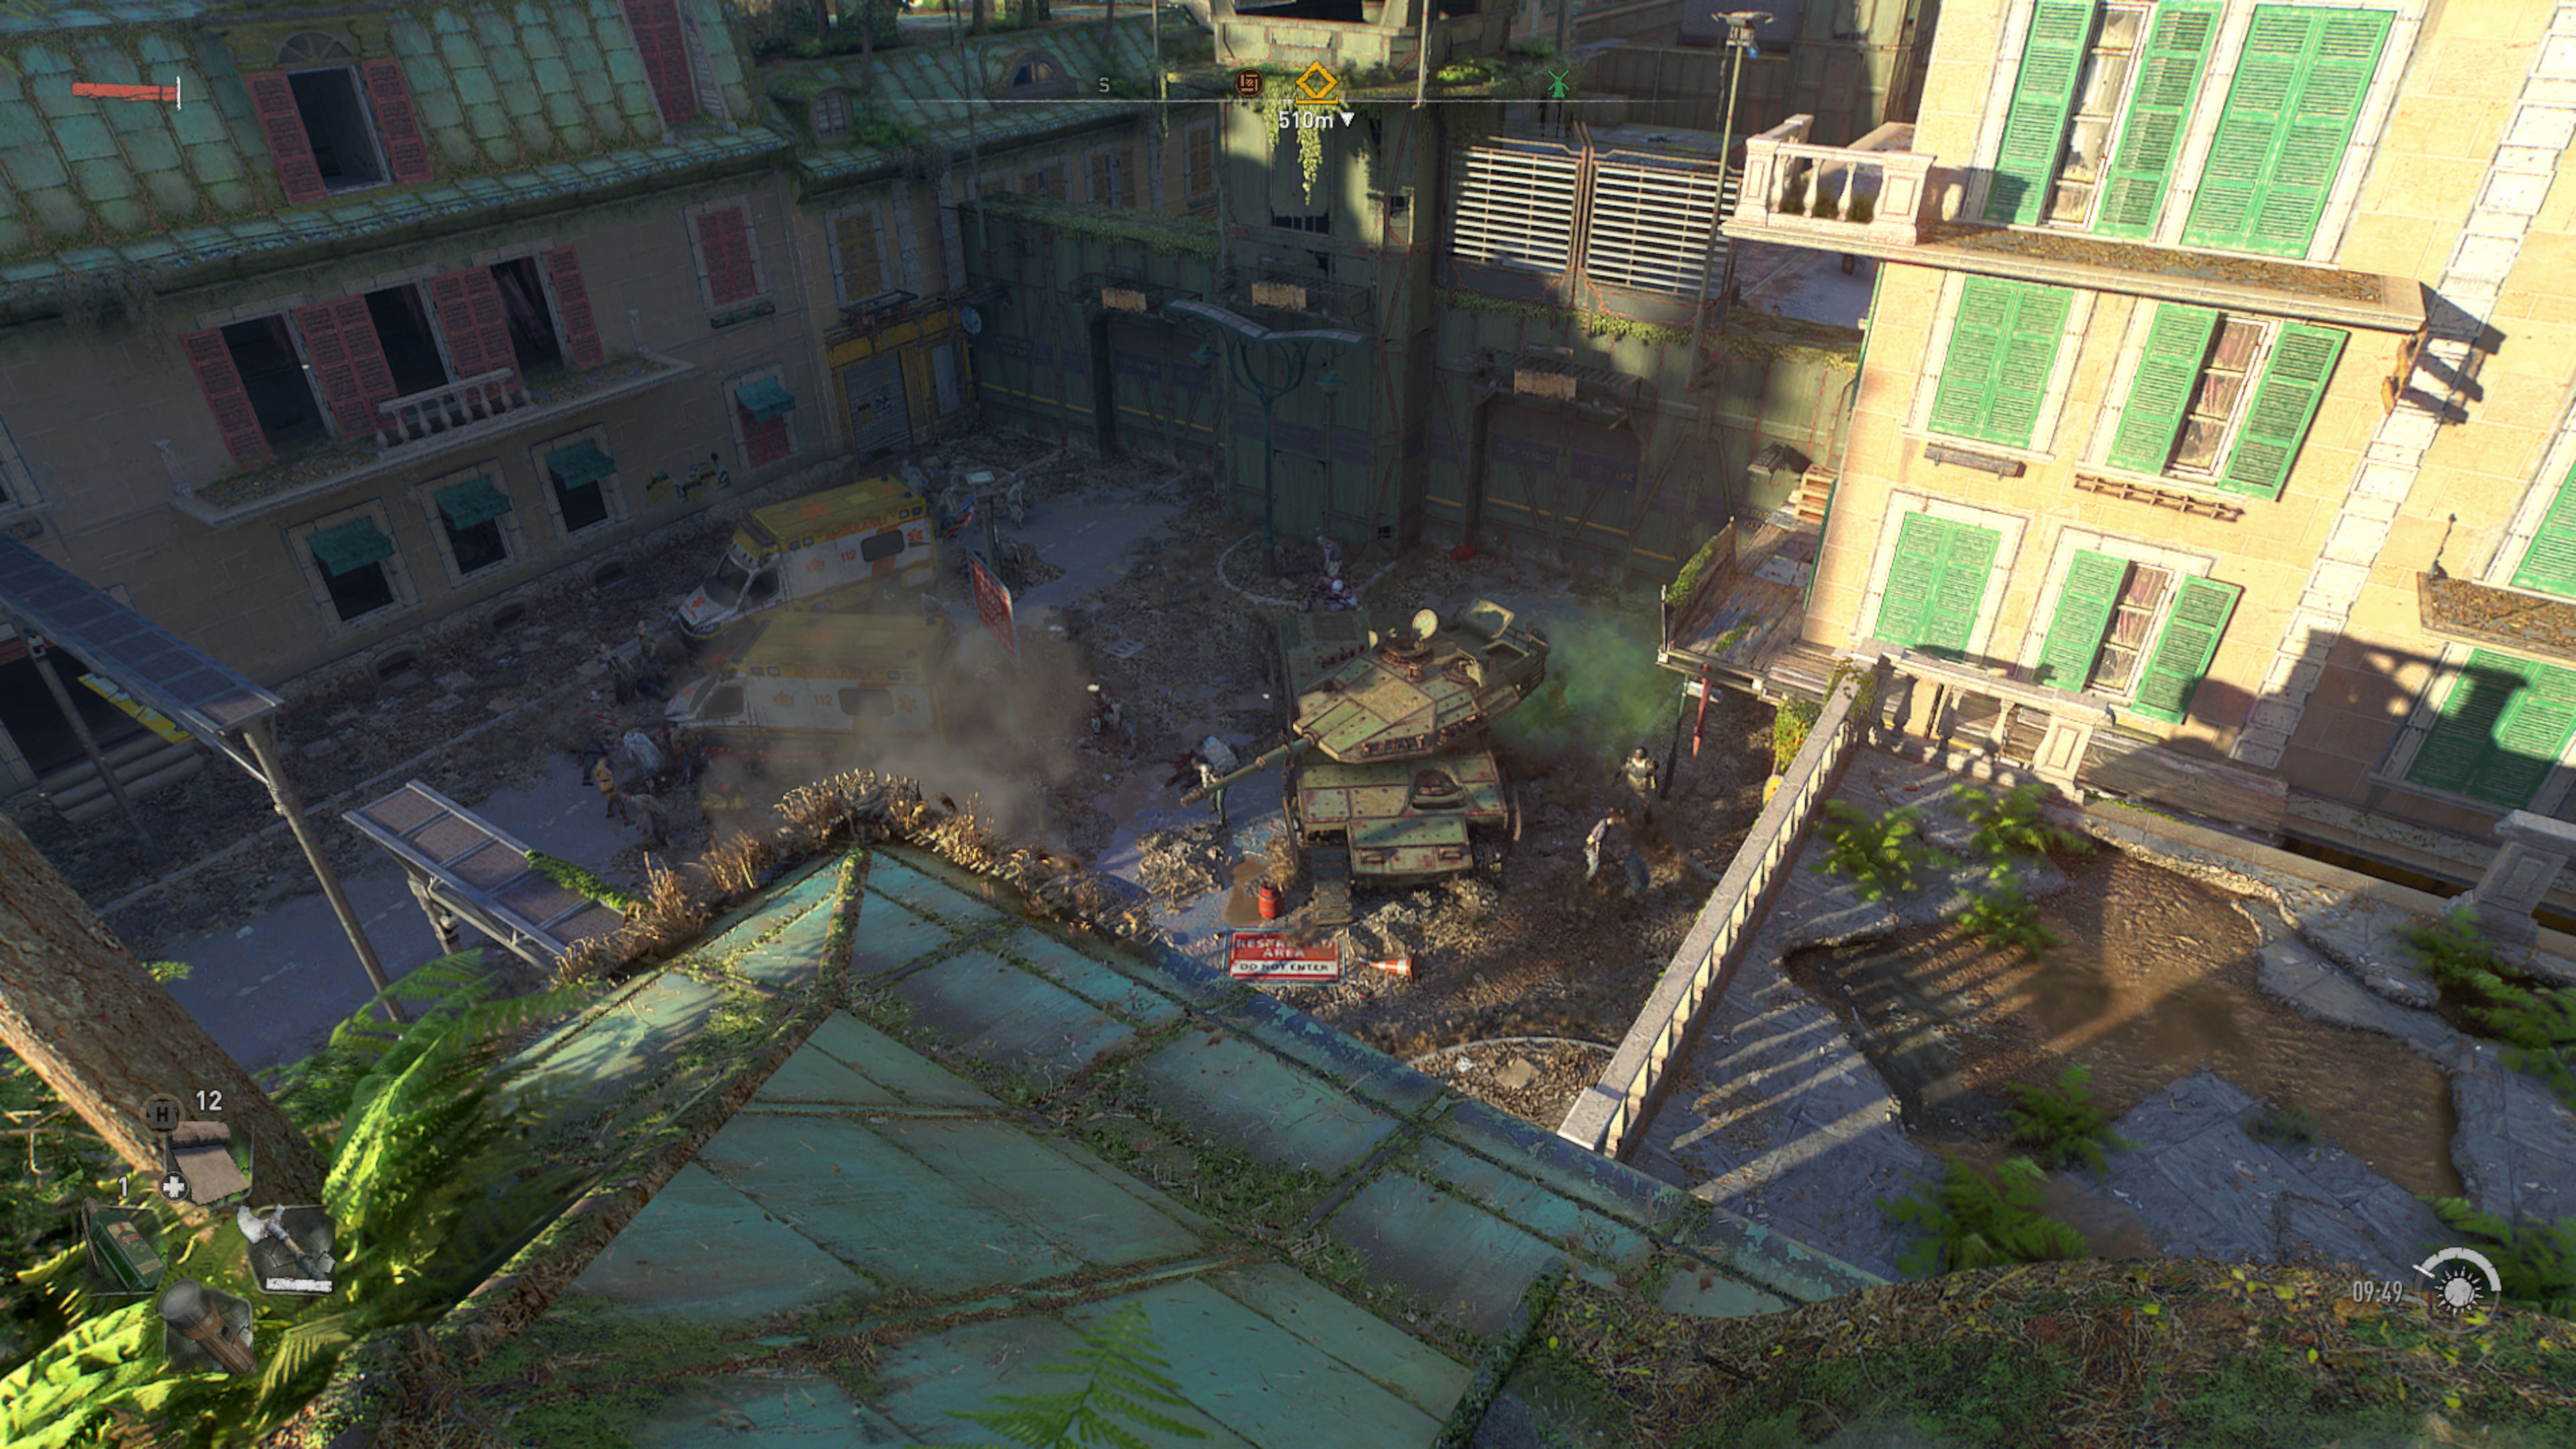 Dying Light 2 settings and image quality comparisons